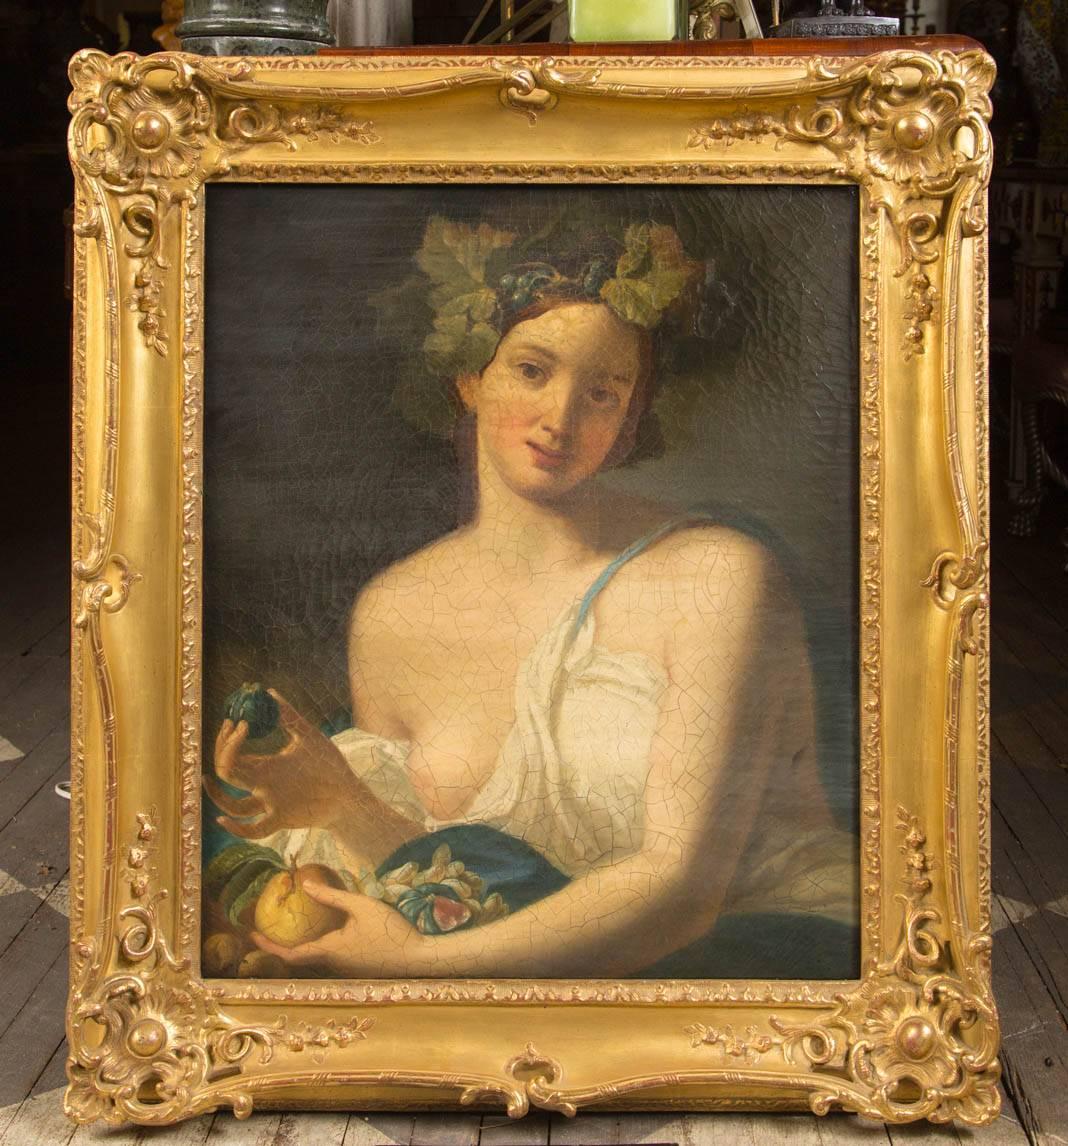 Set within a gilt frame, she holds fruits in both hands. One breast is bare. In her hair are grape clusters and grape leaves.
Unsigned.
Crackled surface.